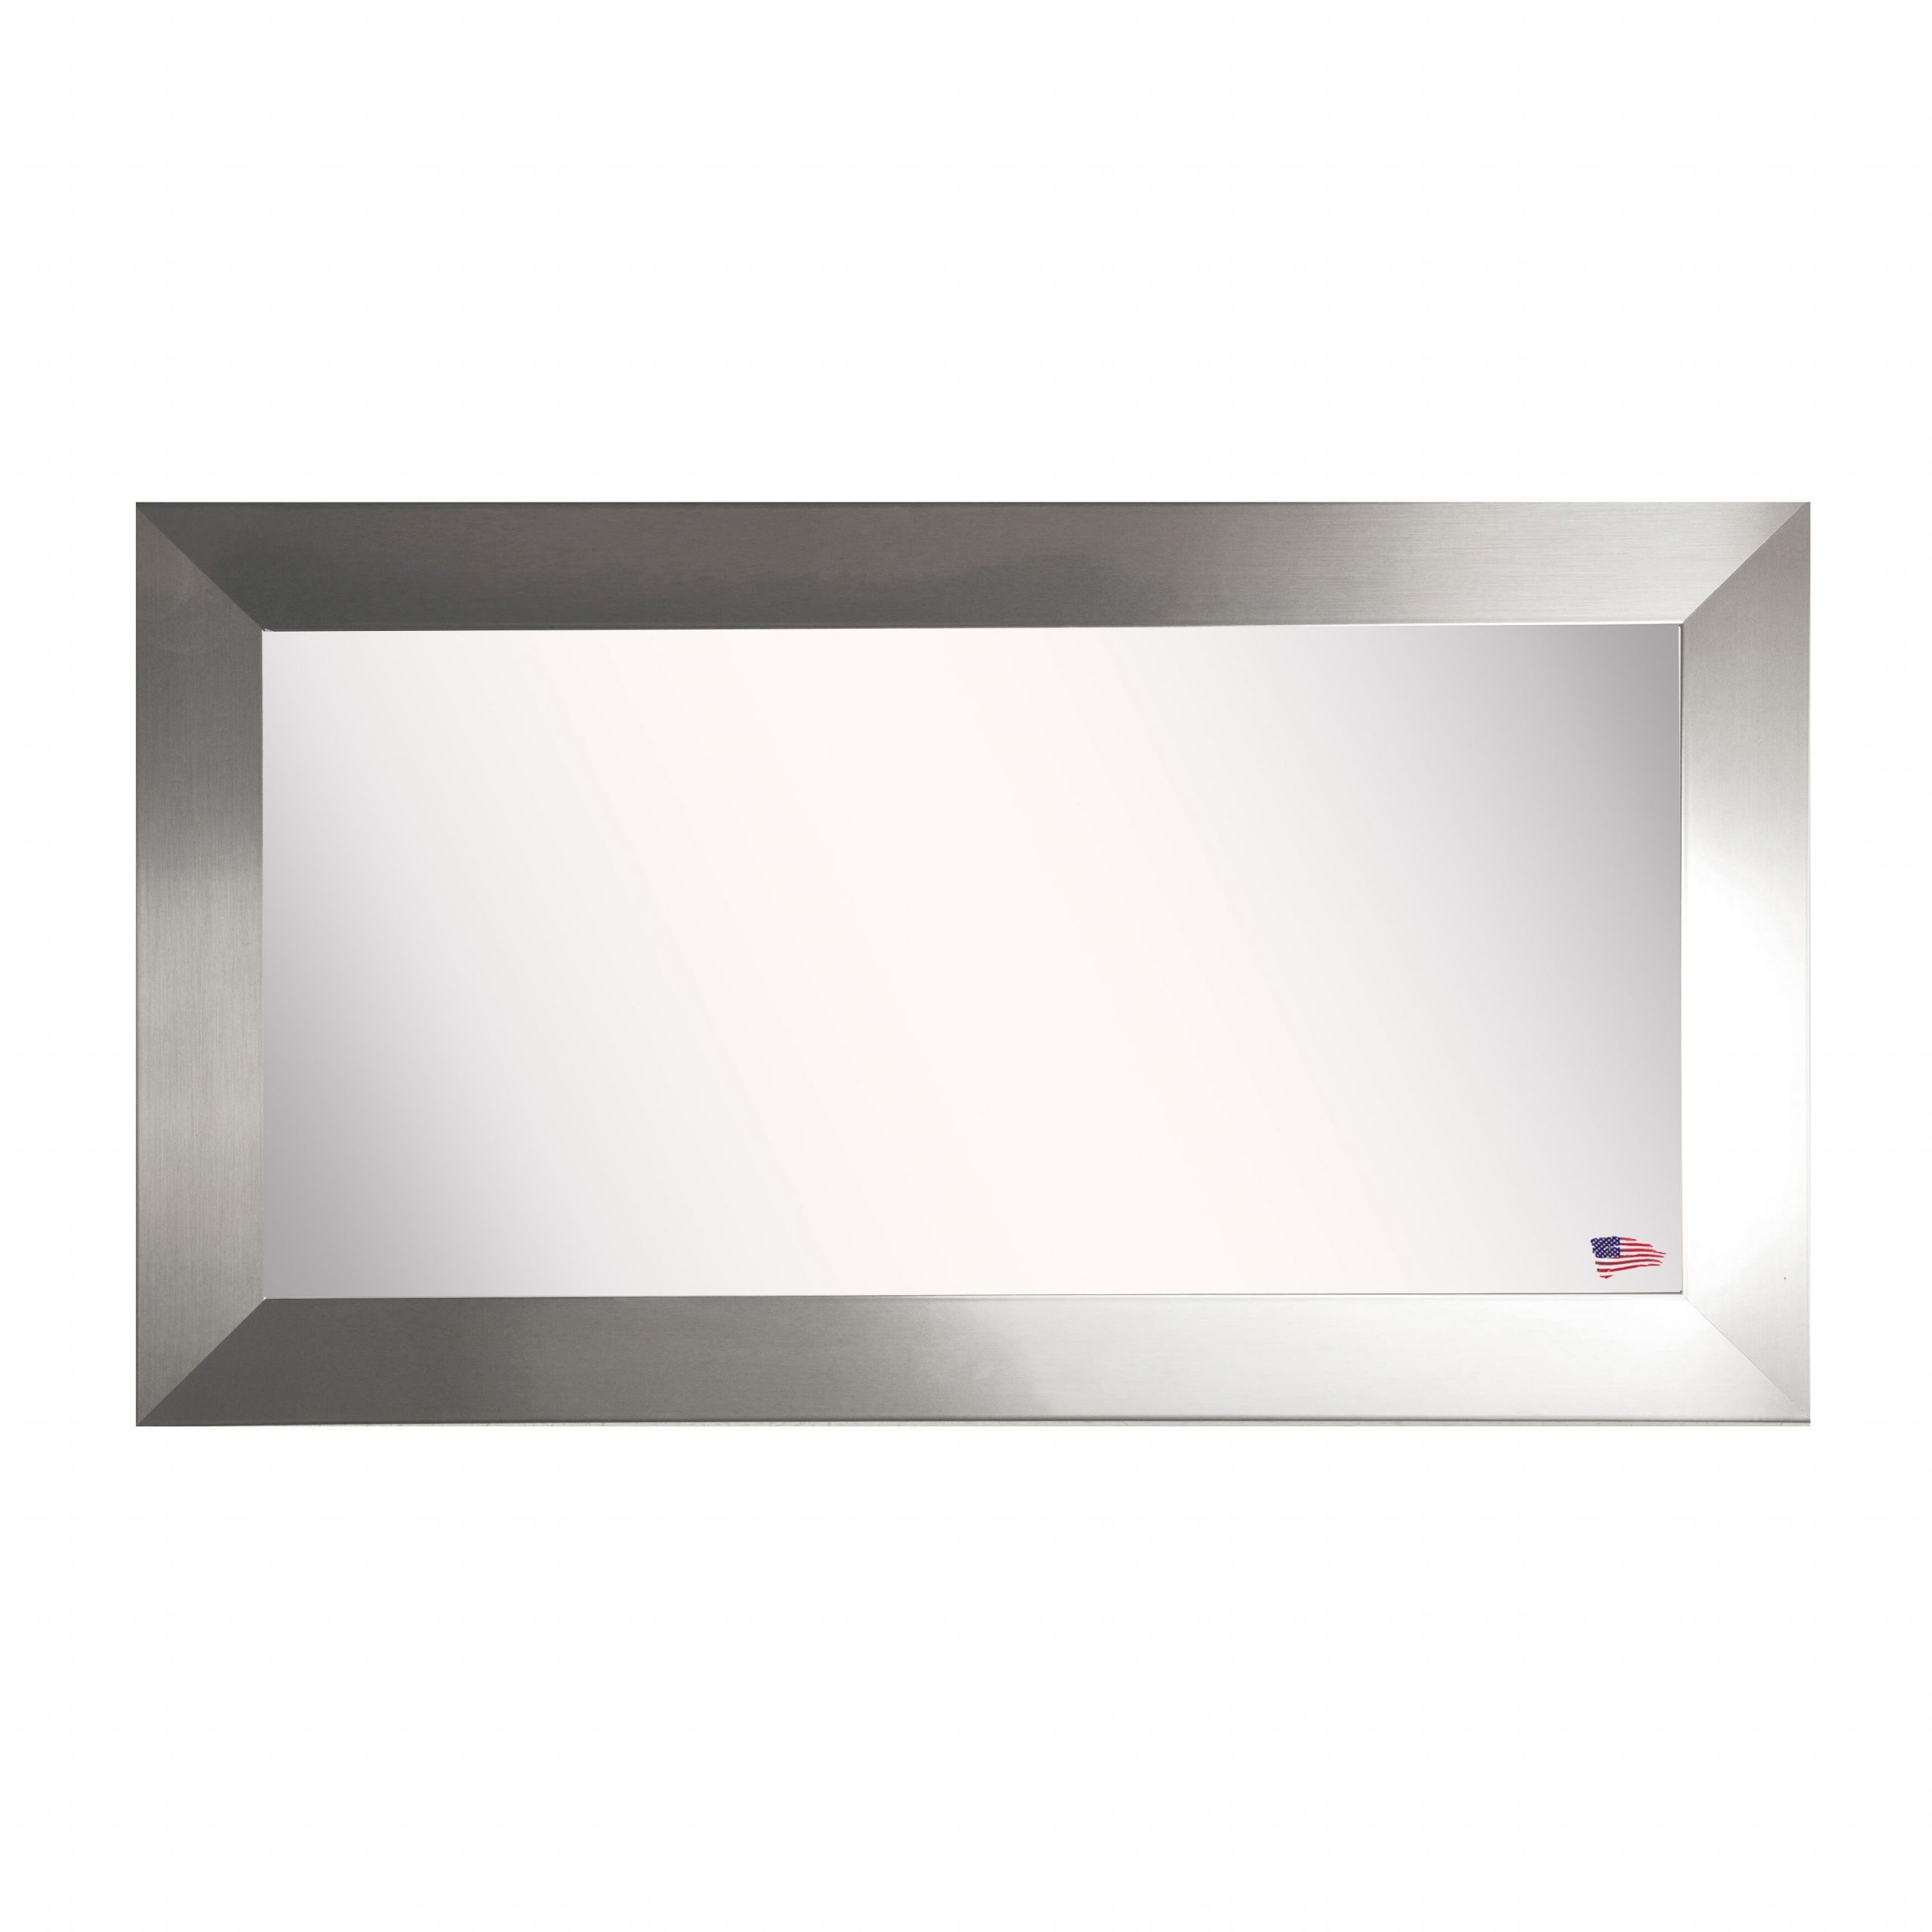 Double Wide Bathroom Mirrors
 Rayne Mirrors Double Wide Vanity Wall Mirror & Reviews